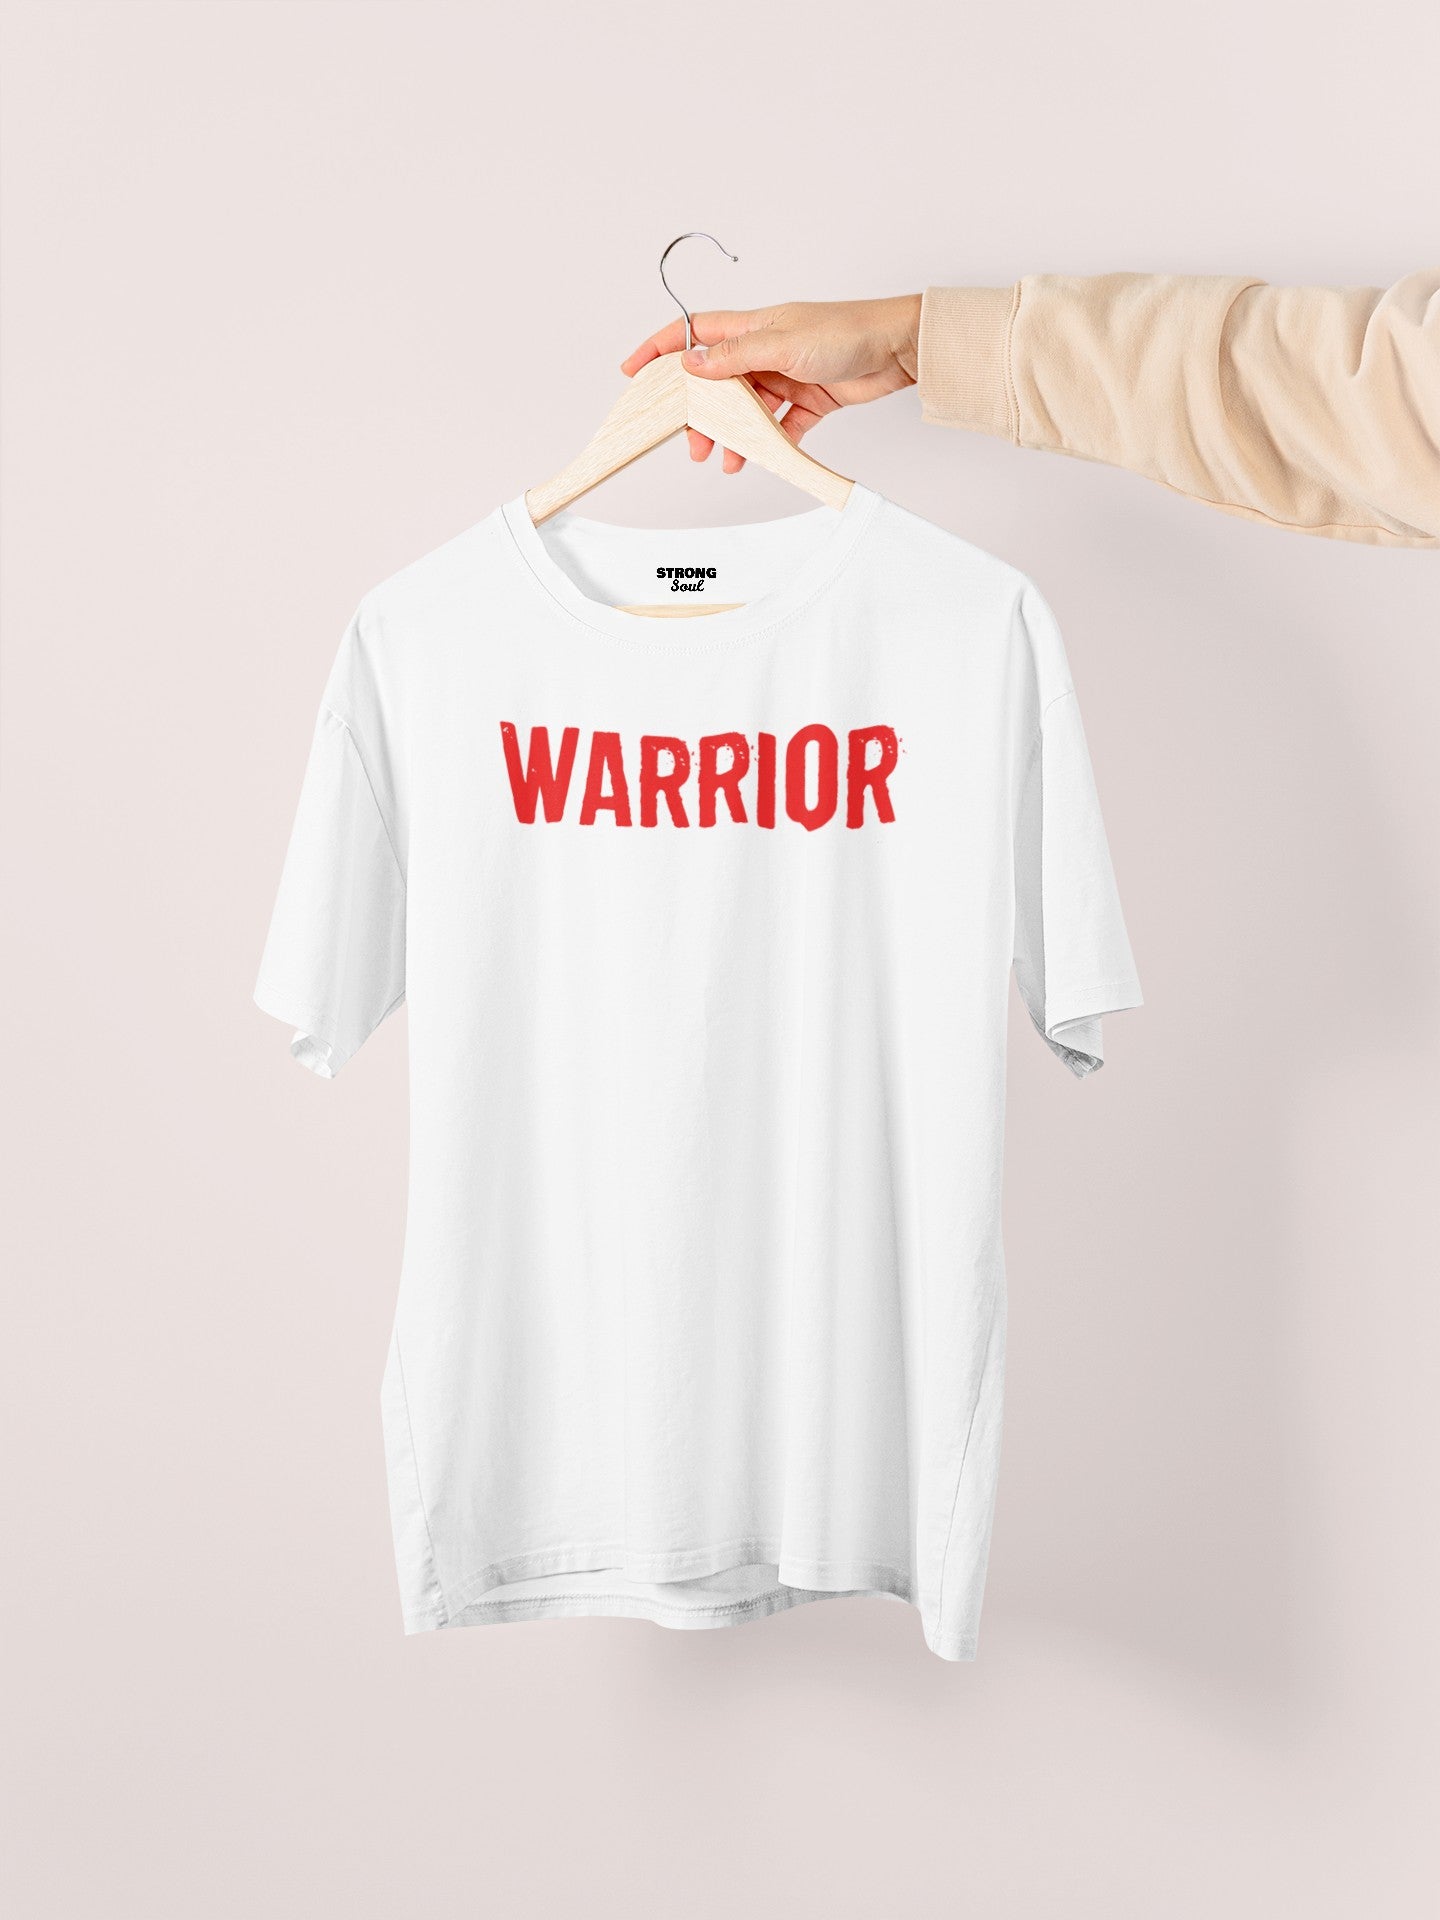 Gym T Shirt - Warrior -Men T-Shirt with premium cotton Lycra. The Sports T Shirt by Strong Soul